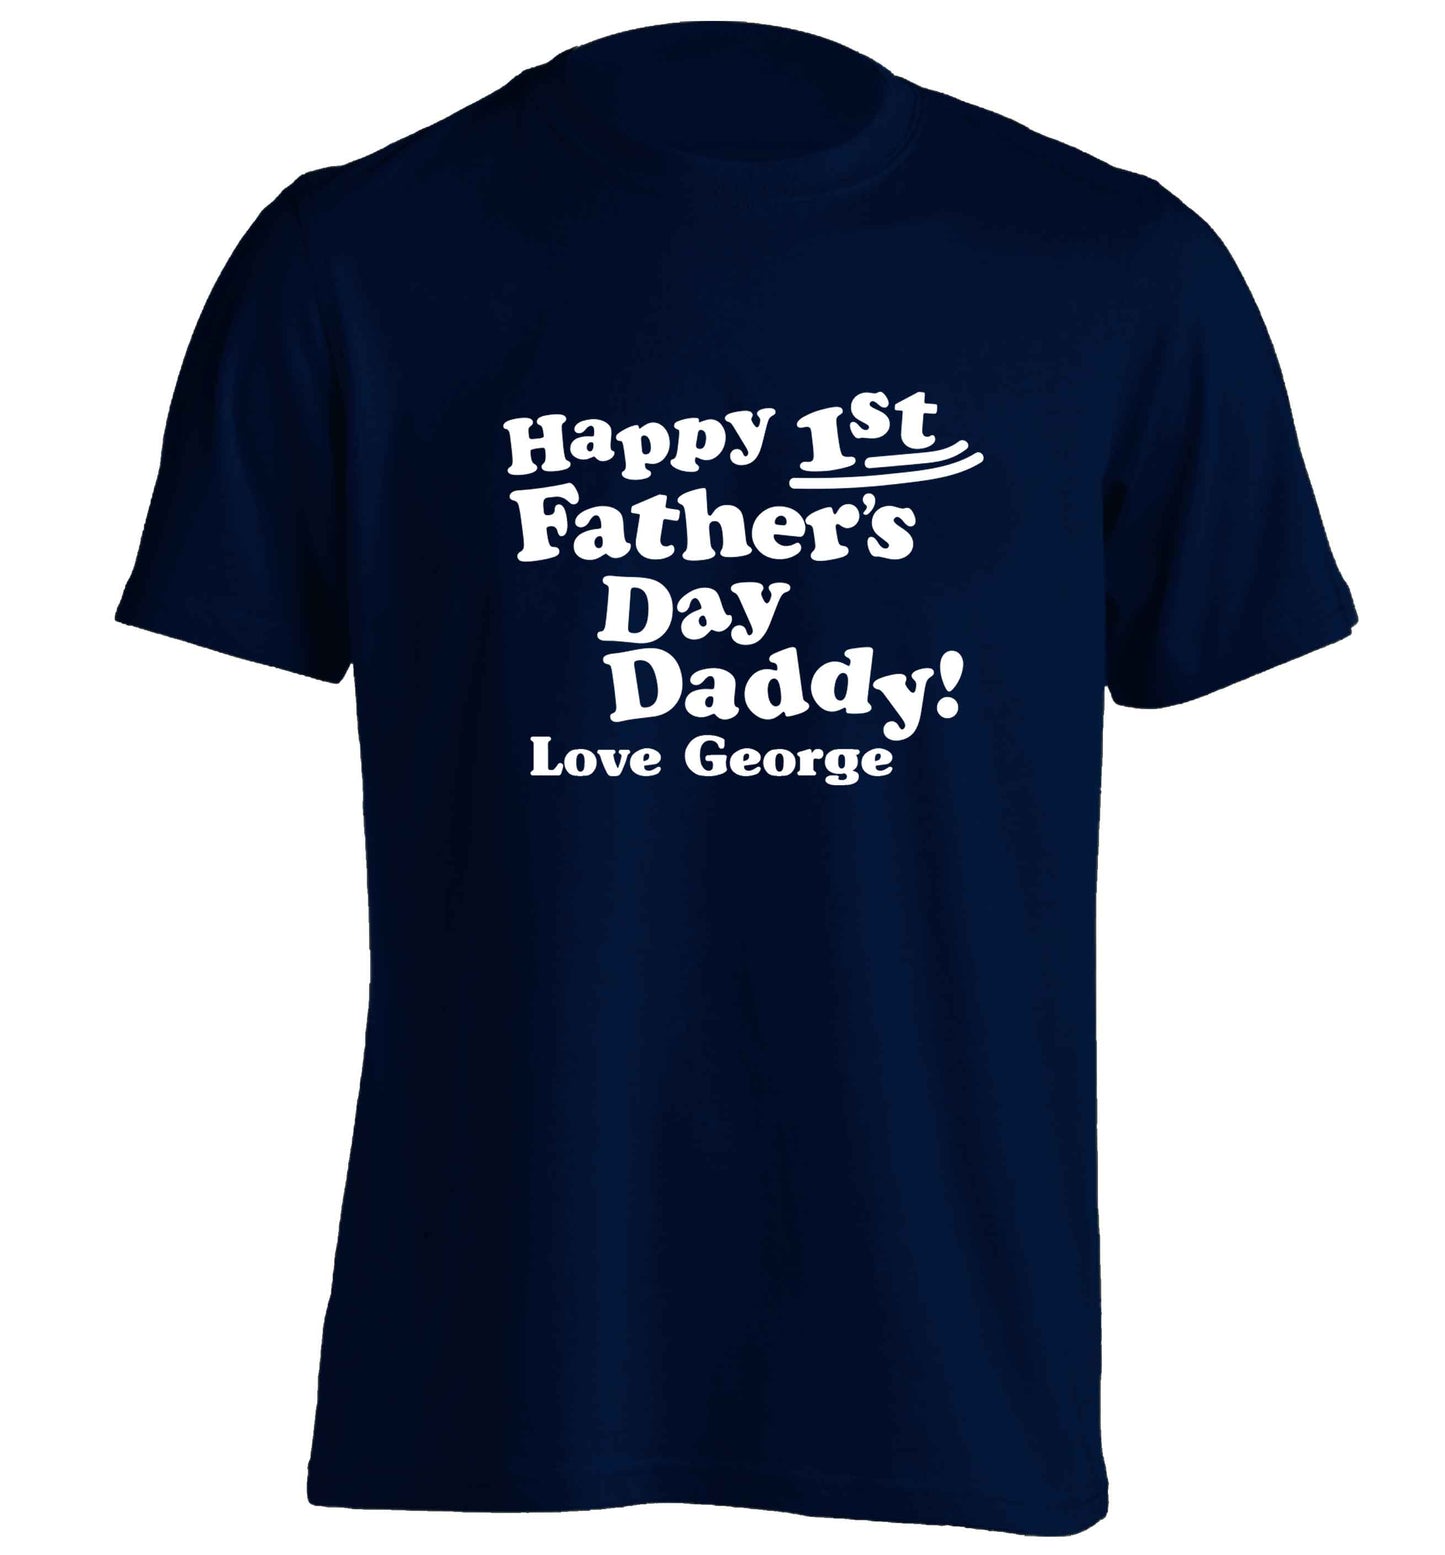 Happy first Fathers Day daddy love personalised adults unisex navy Tshirt 2XL